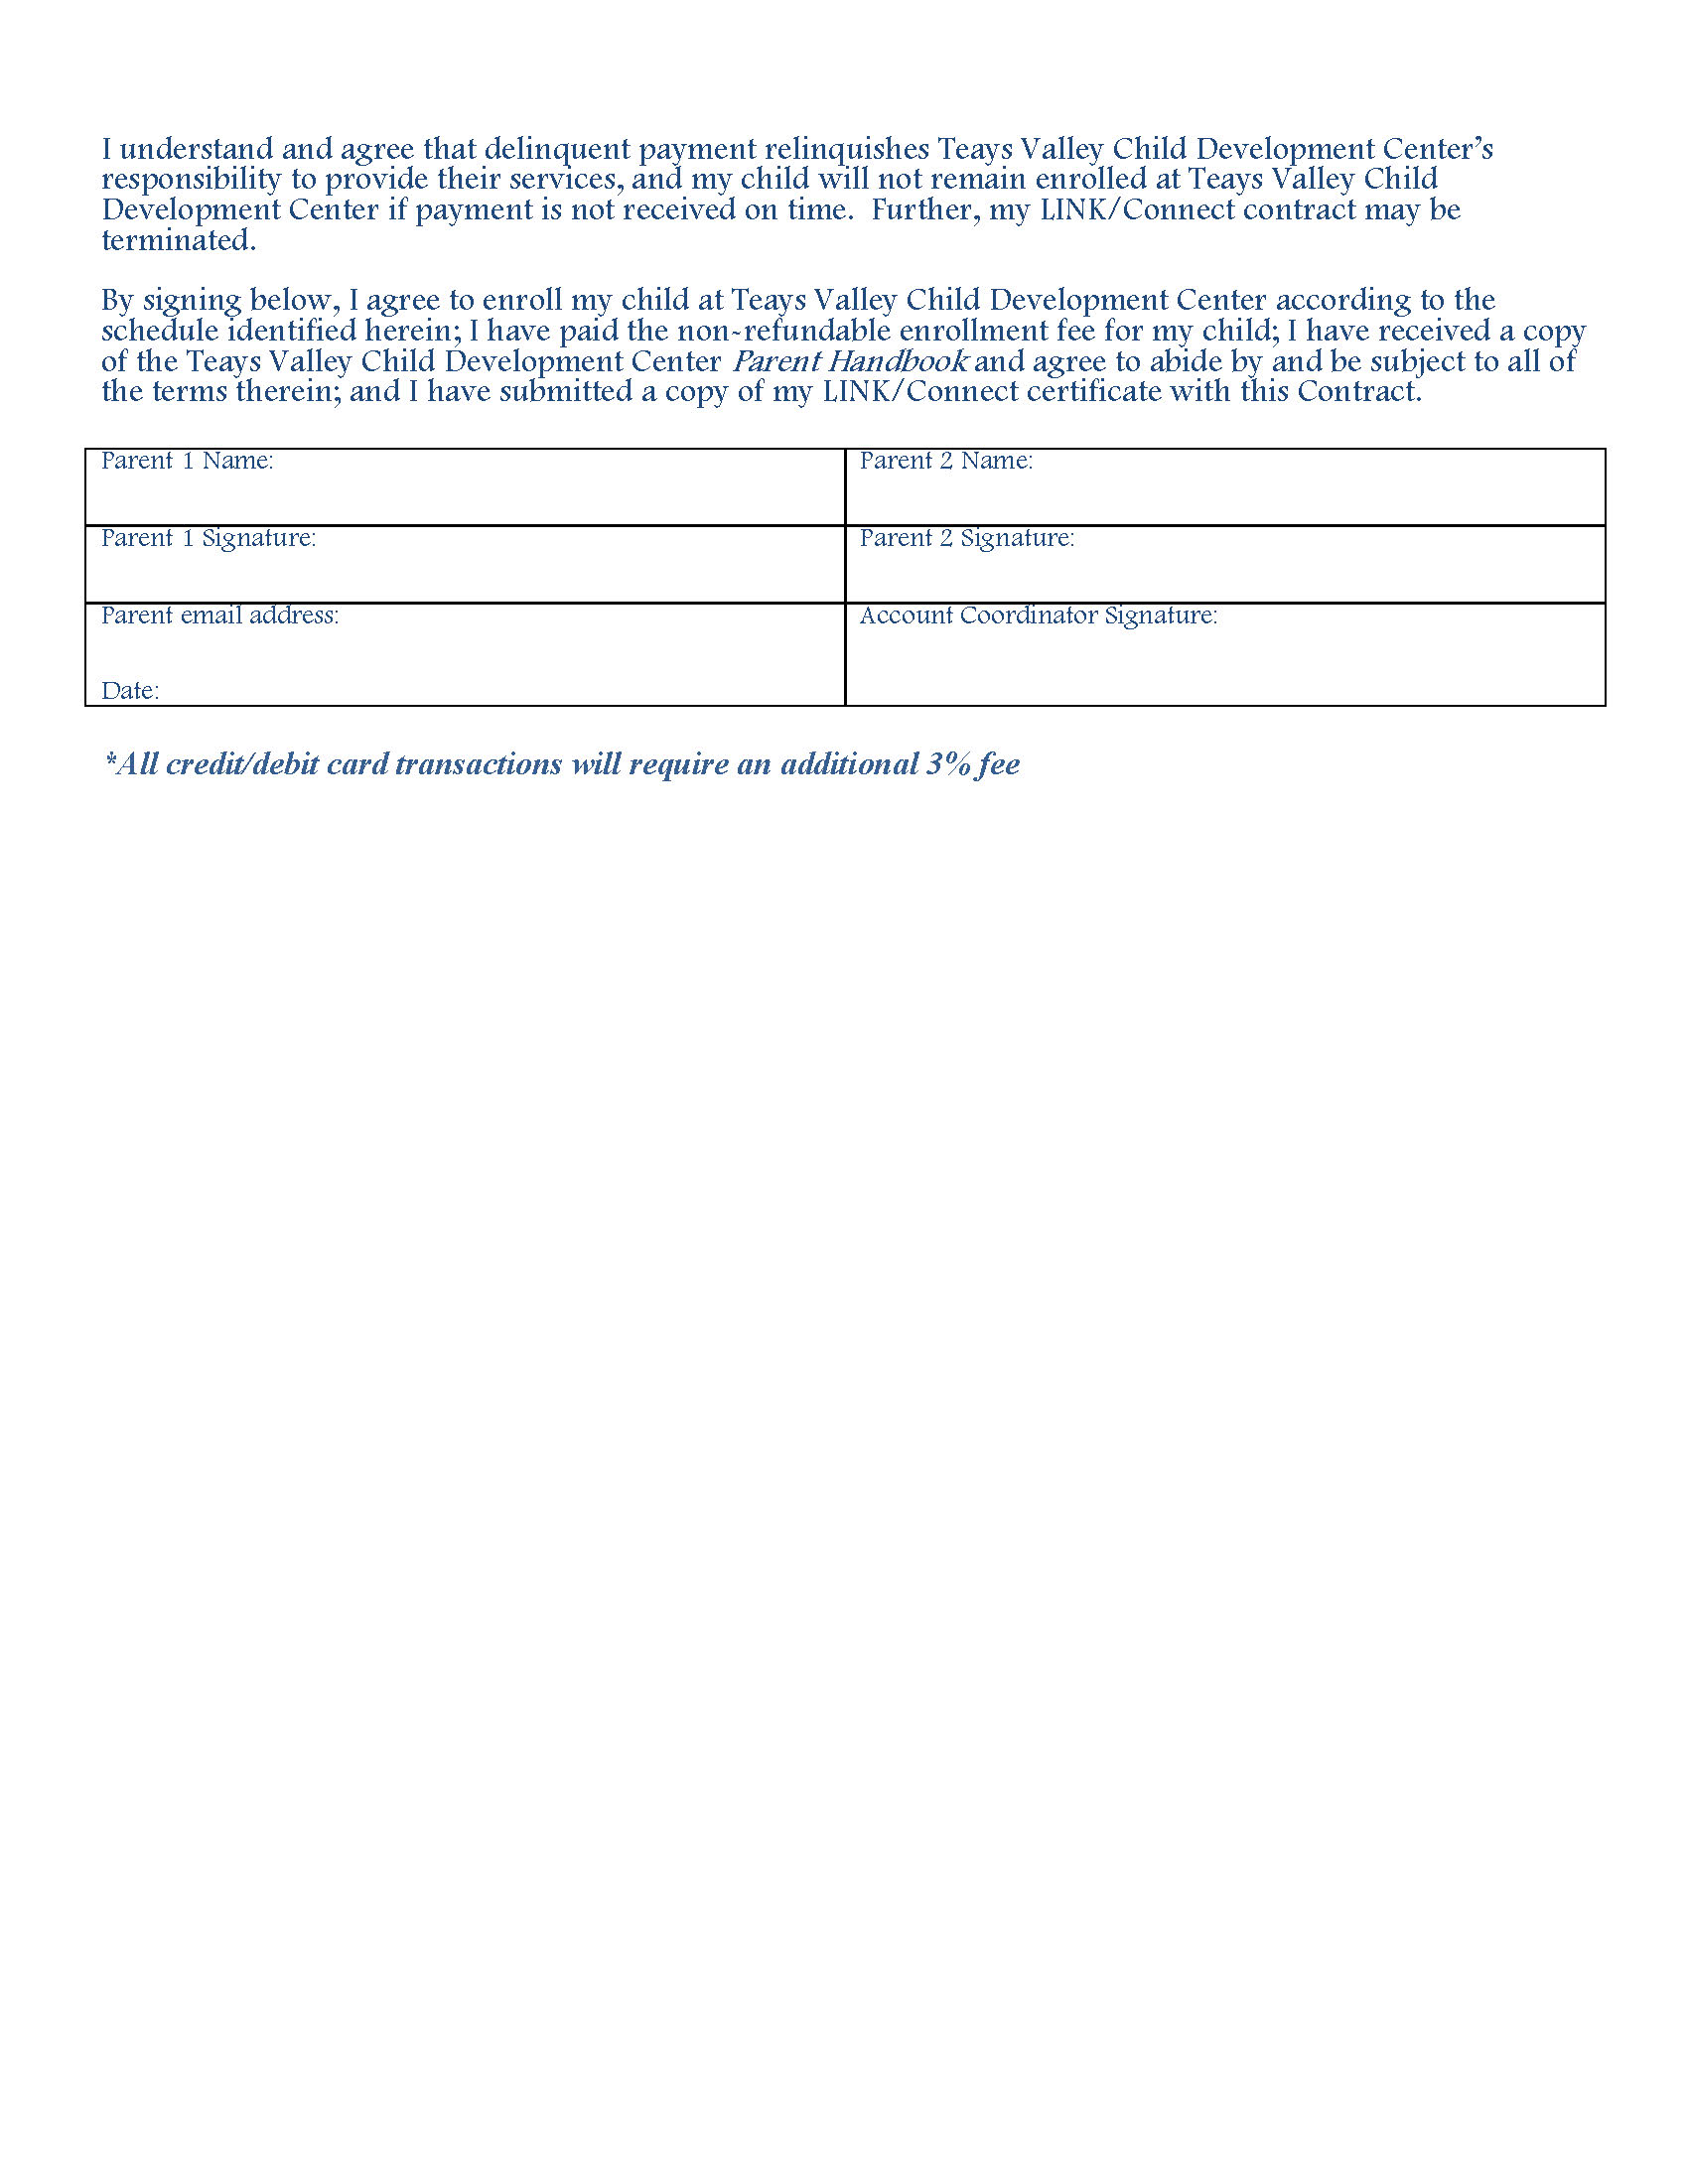 LINK Pay Agreement Page 2